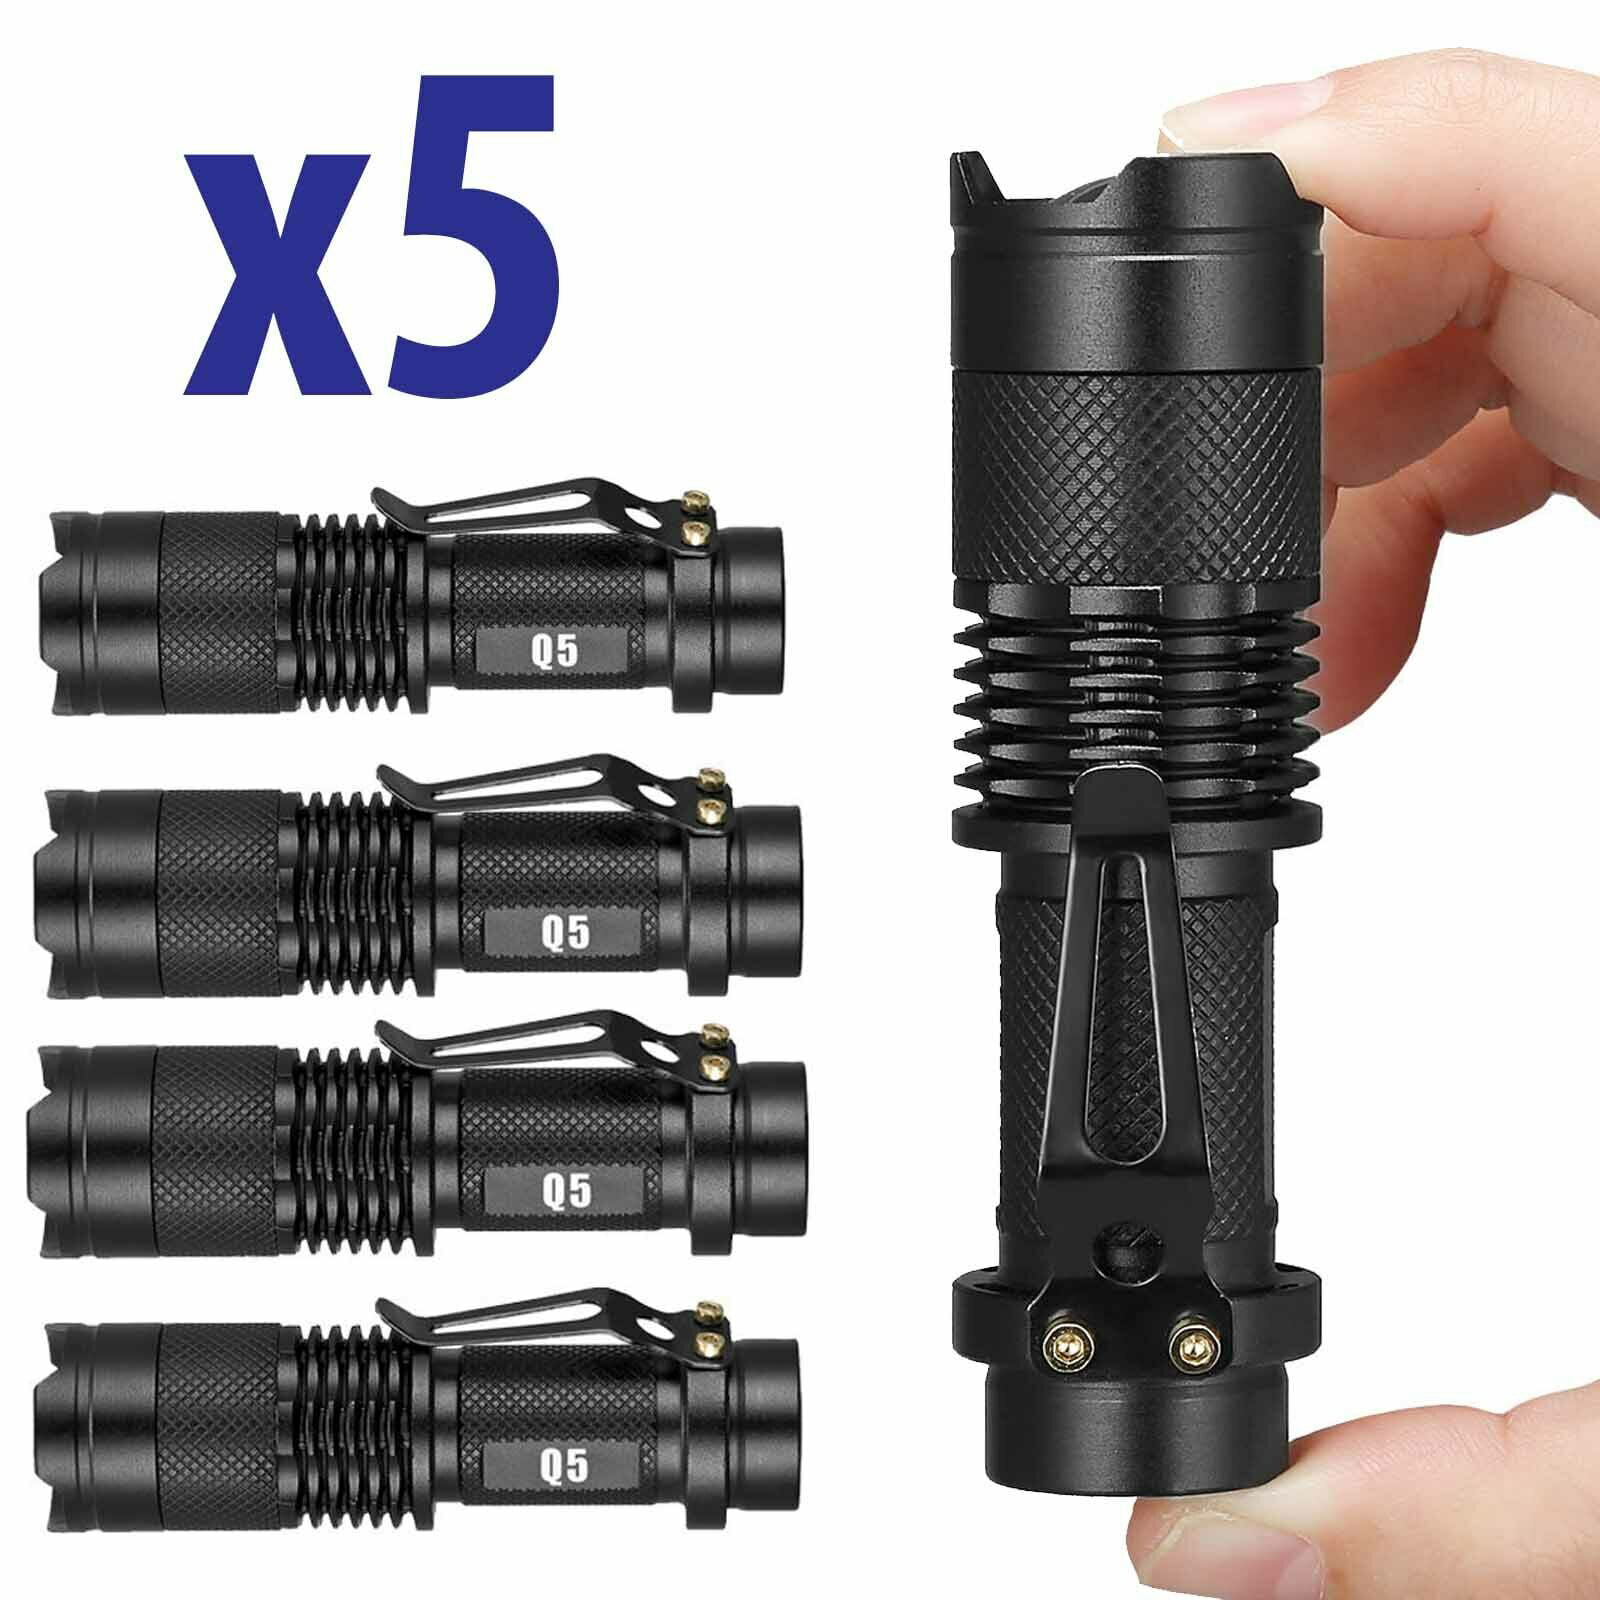 Rechargeable 10000LM 5X XML T6 LED Tactical Flashlight Light Torch Light